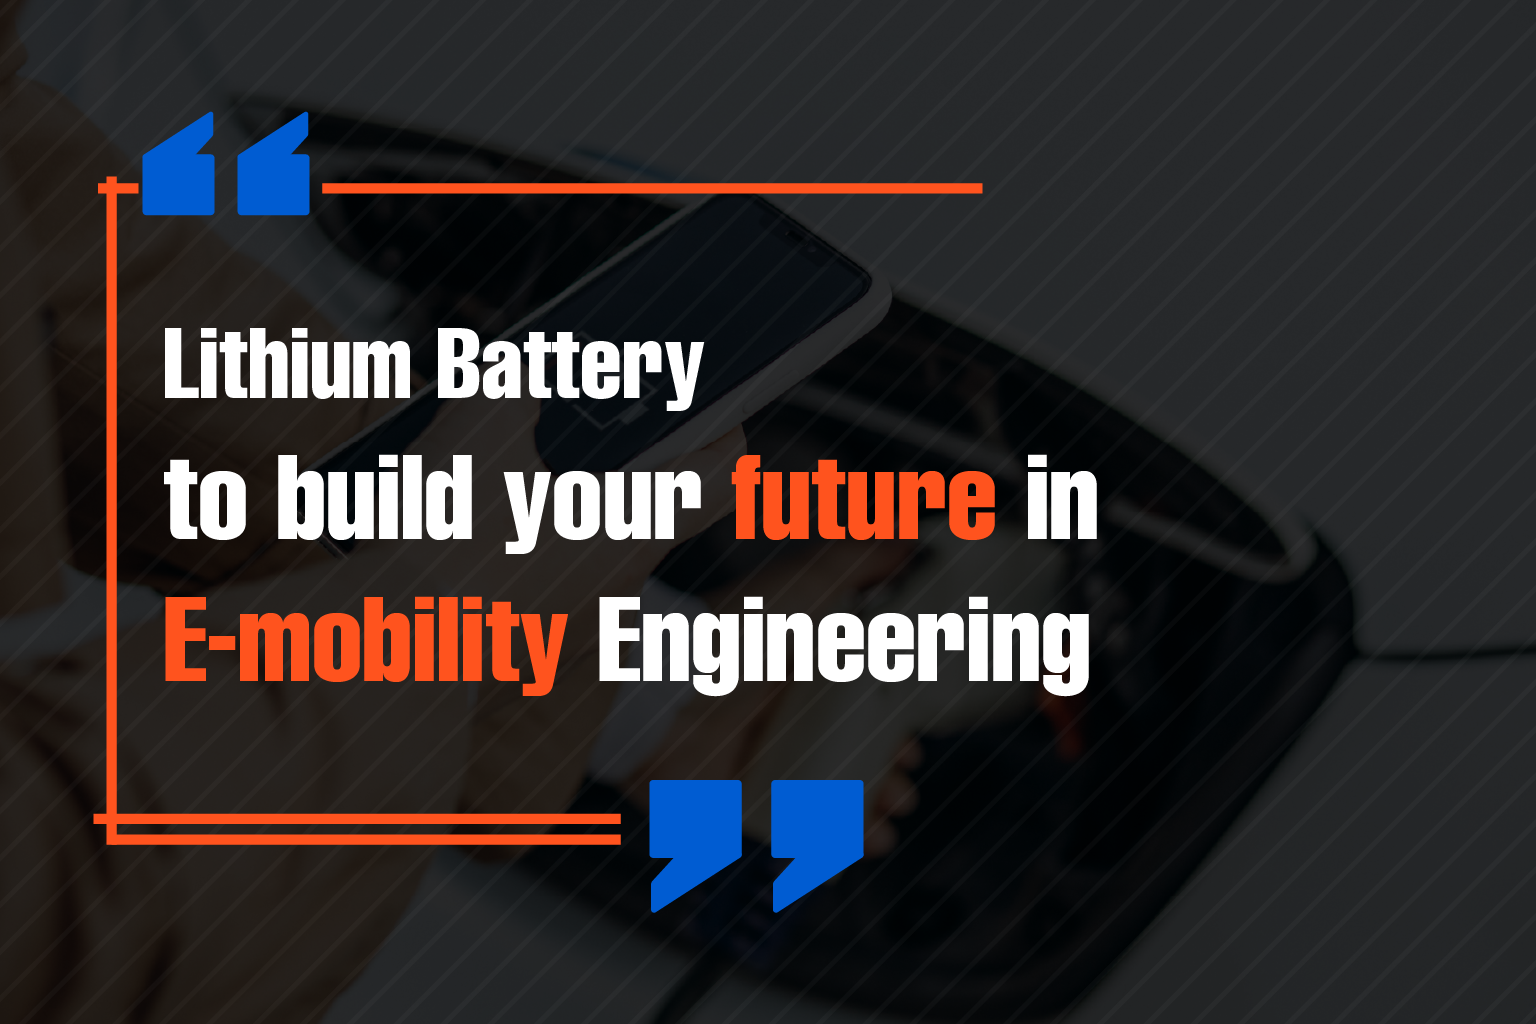 Skills to build your future in E-mobility Engineering